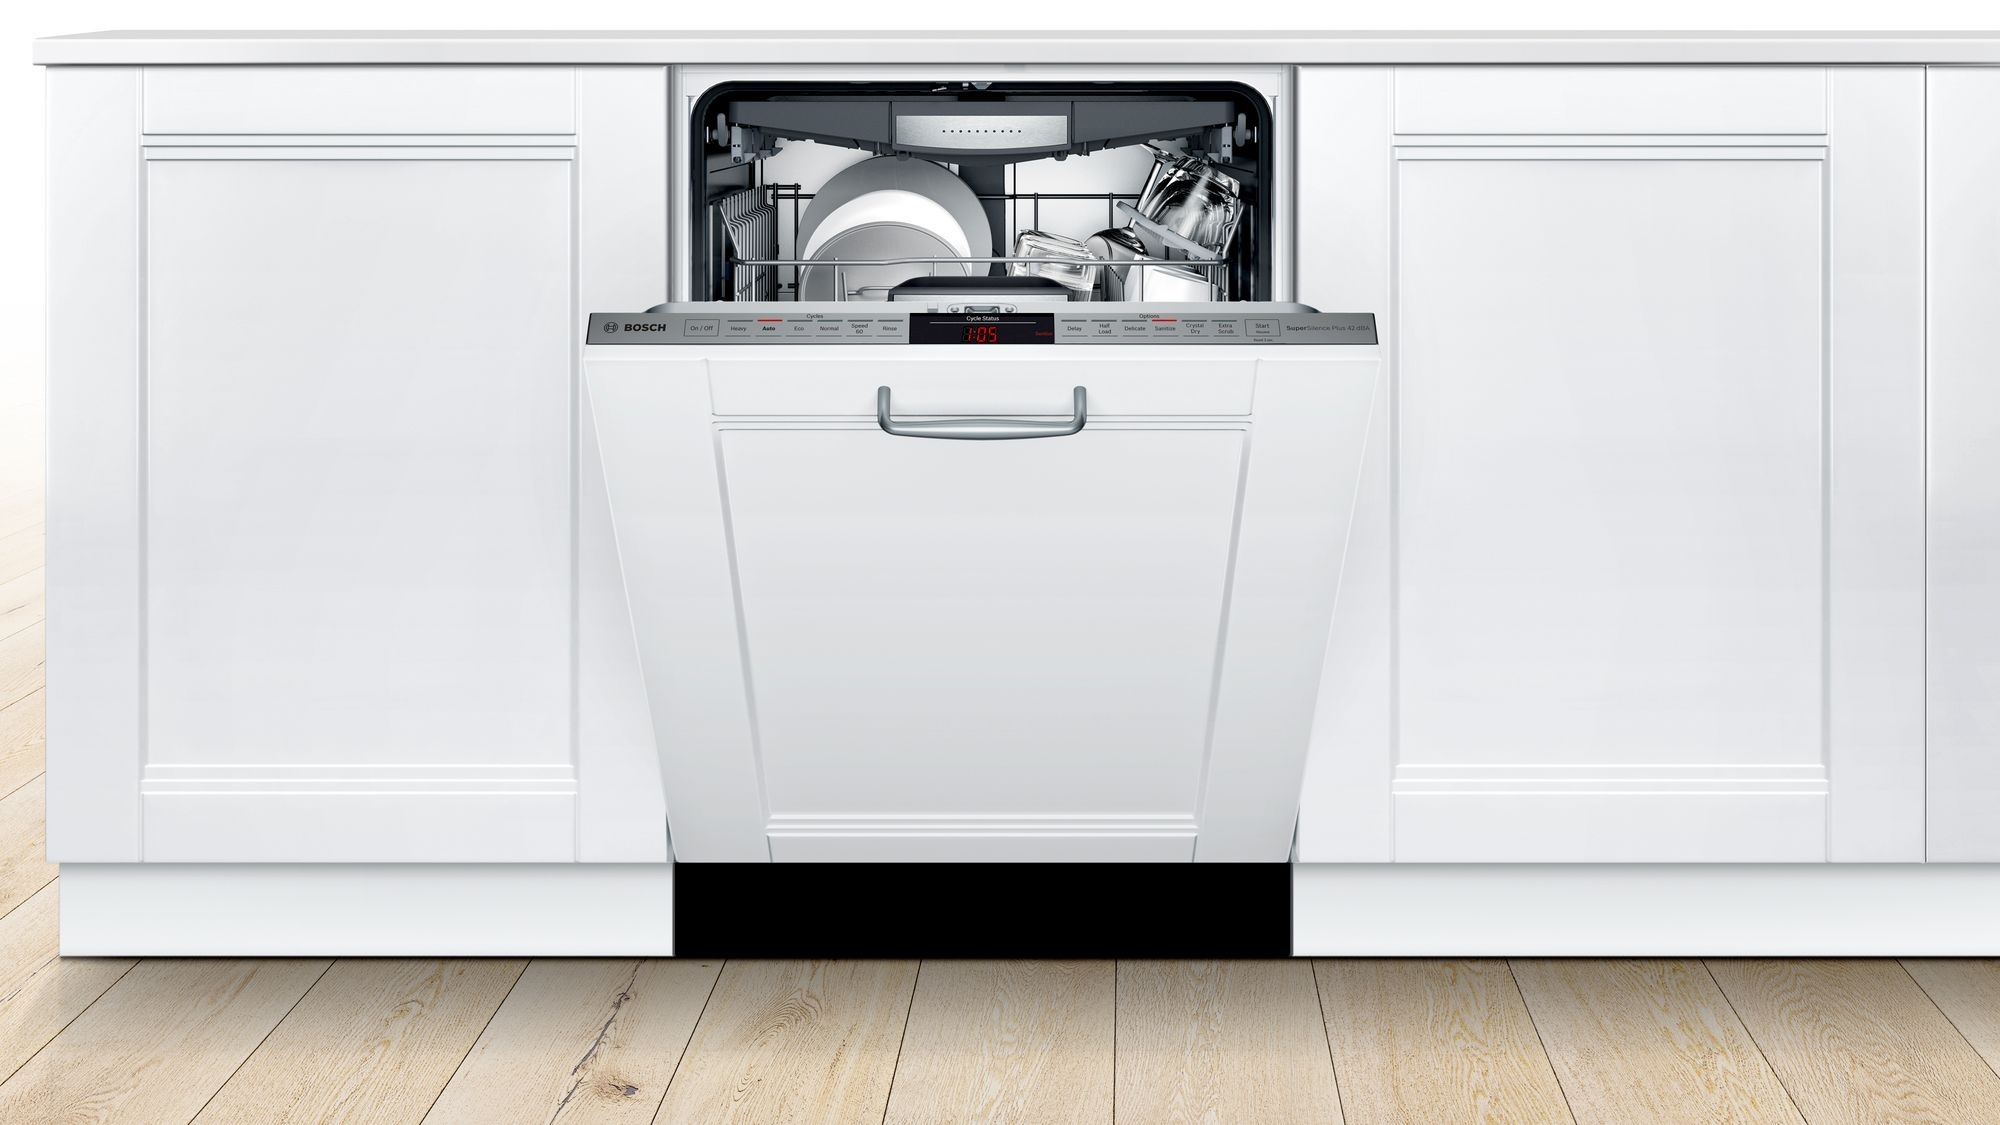 Bosch top-control-dishwasher with custom panel that matches white cabinetry